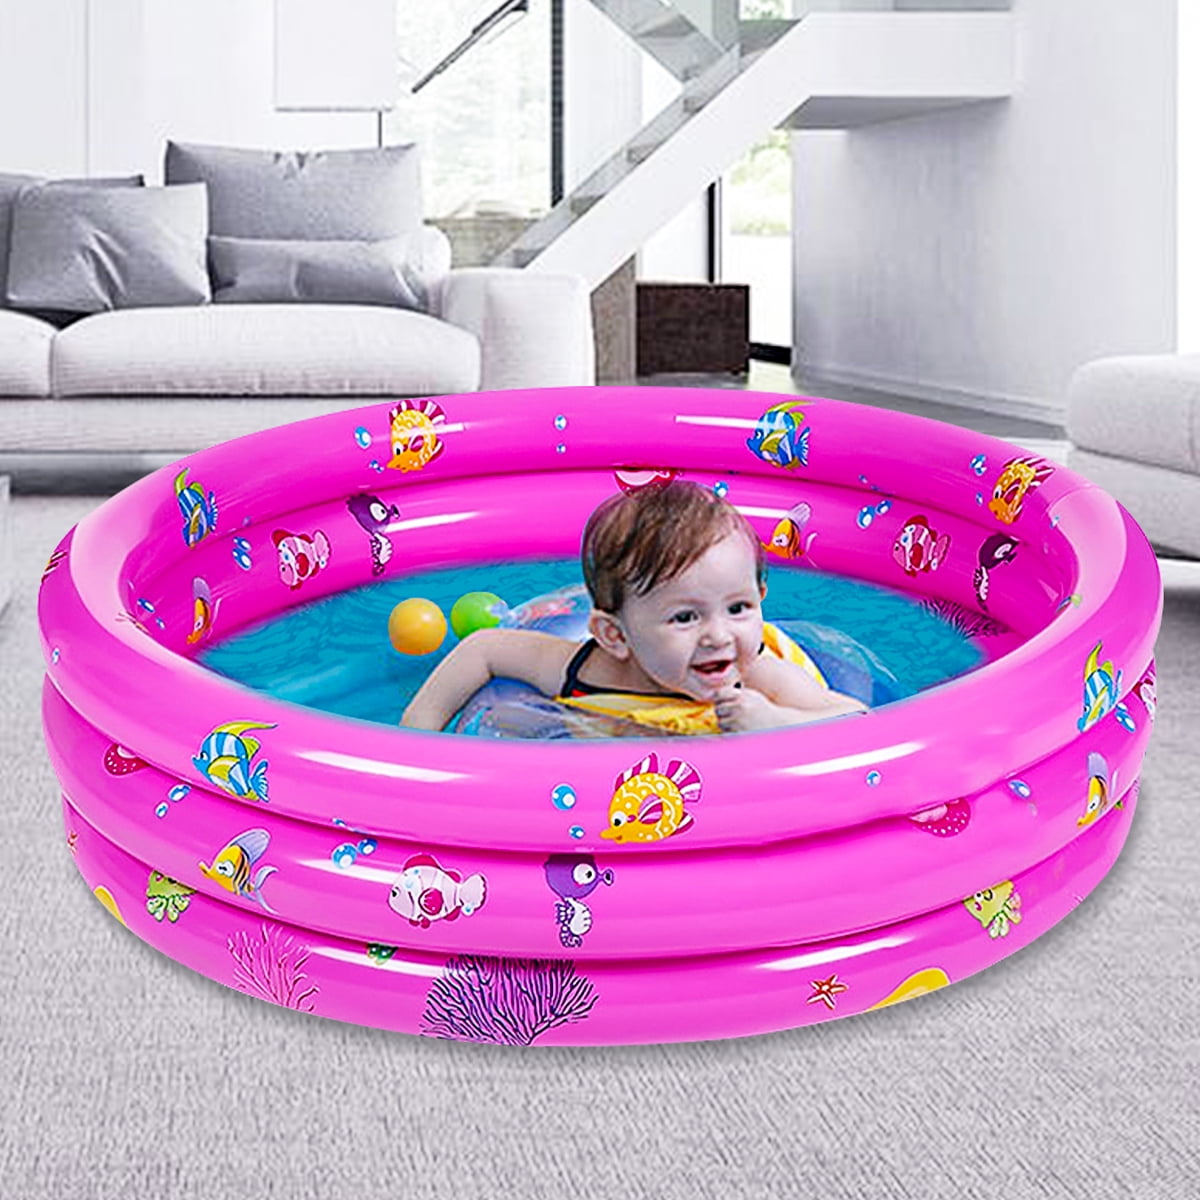 150cm 60" Inflatable Swimming Pool Ball Pit Baby Kids Outdoor Indoor Party Pink 